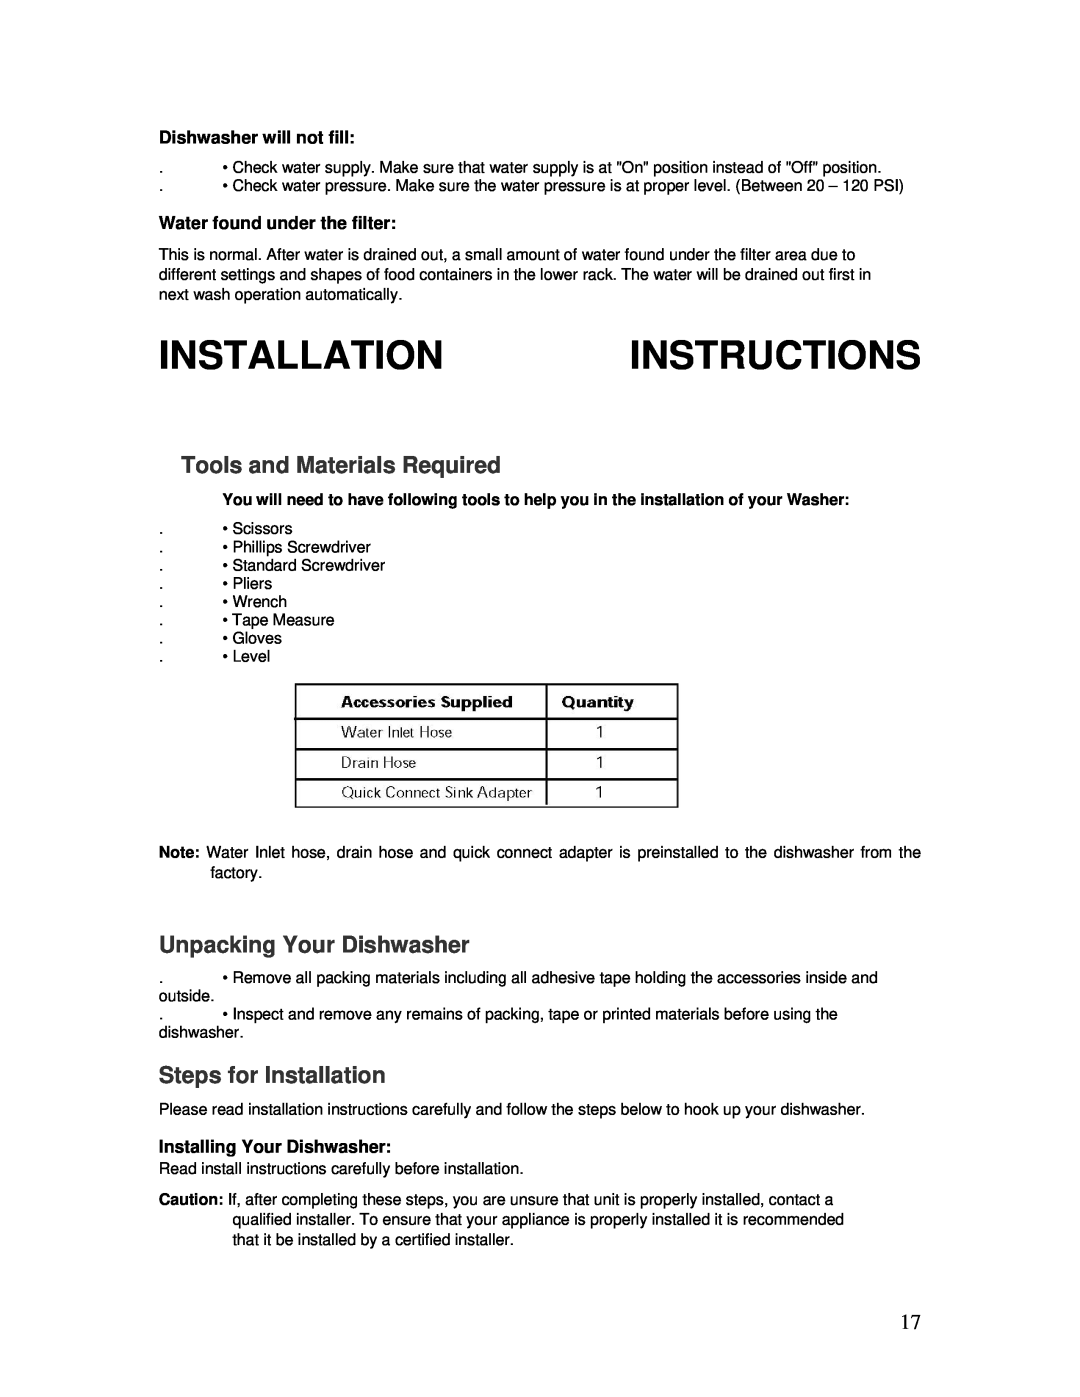 Tappan TDT4030W Installation Instructions, Tools and Materials Required, Unpacking Your Dishwasher, Steps for Installation 